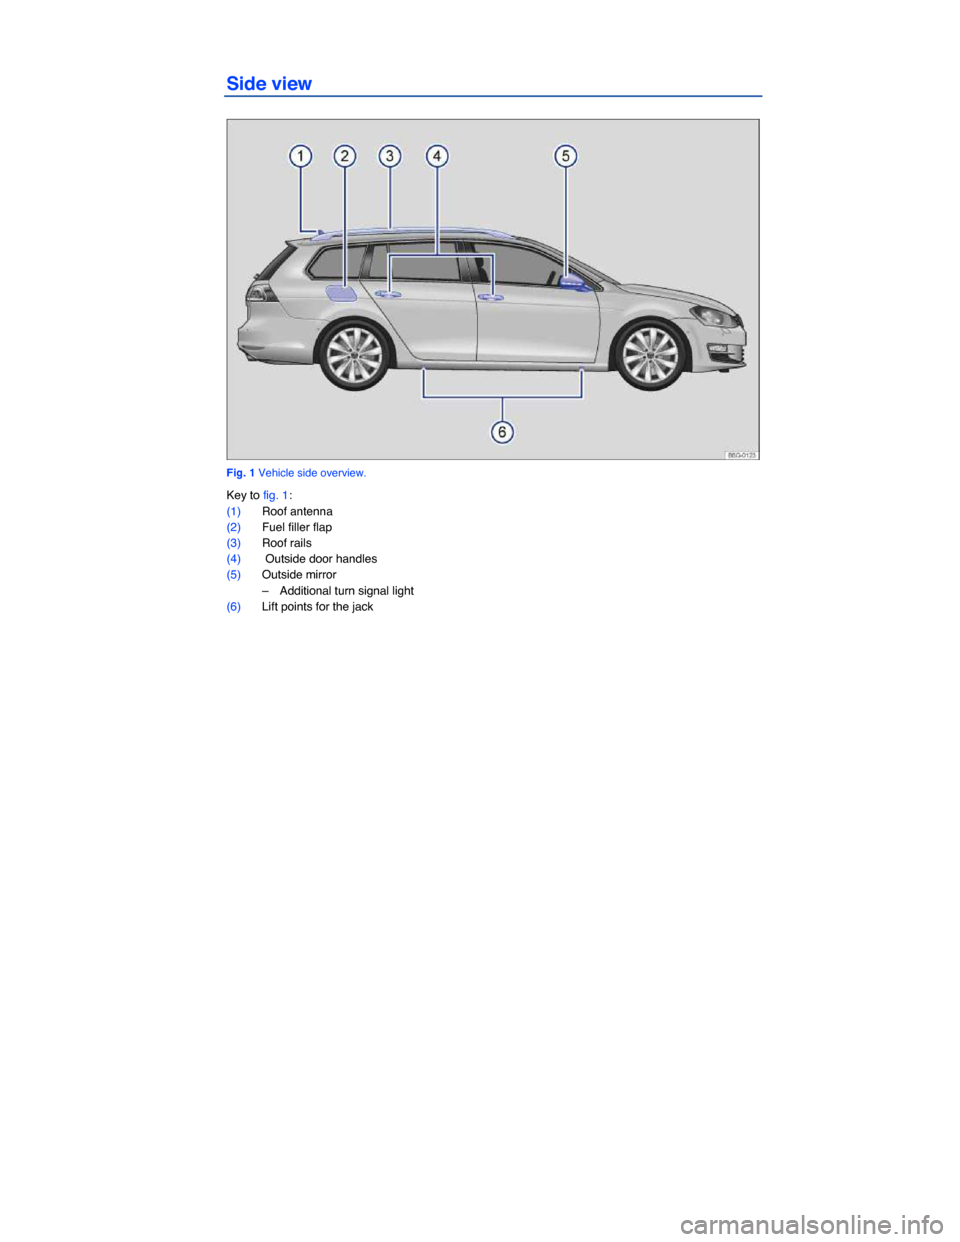 VOLKSWAGEN GOLF SPORTWAGEN 2015 5G / 7.G Owners Manual  
Side view 
 
Fig. 1 Vehicle side overview. 
Key to fig. 1: 
(1) Roof antenna  
(2) Fuel filler flap  
(3) Roof rails  
(4)  Outside door handles  
(5) Outside mirror  
–  Additional turn signal li